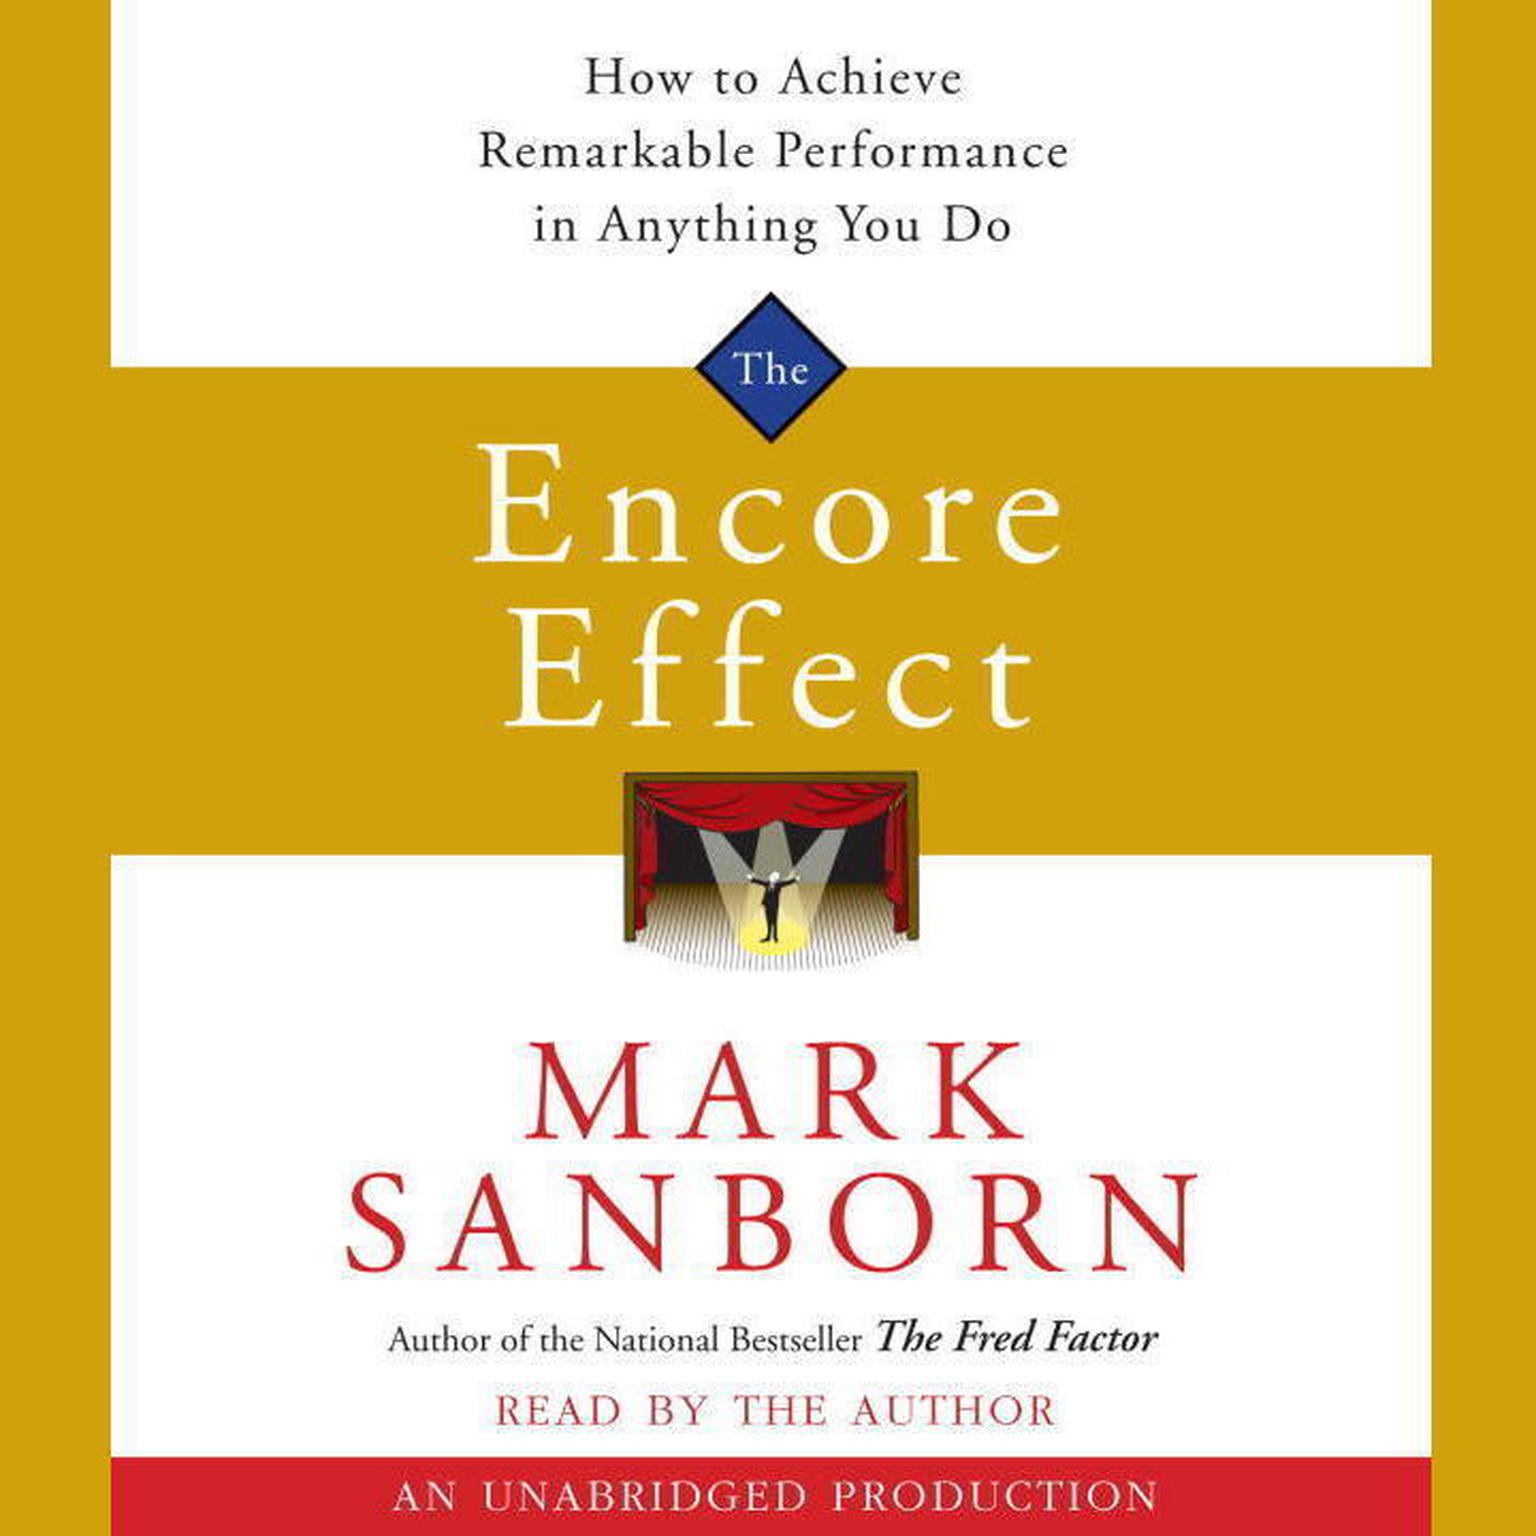 The Encore Effect: How to Achieve Remarkable Performance in Anything You Do Audiobook, by Mark Sanborn